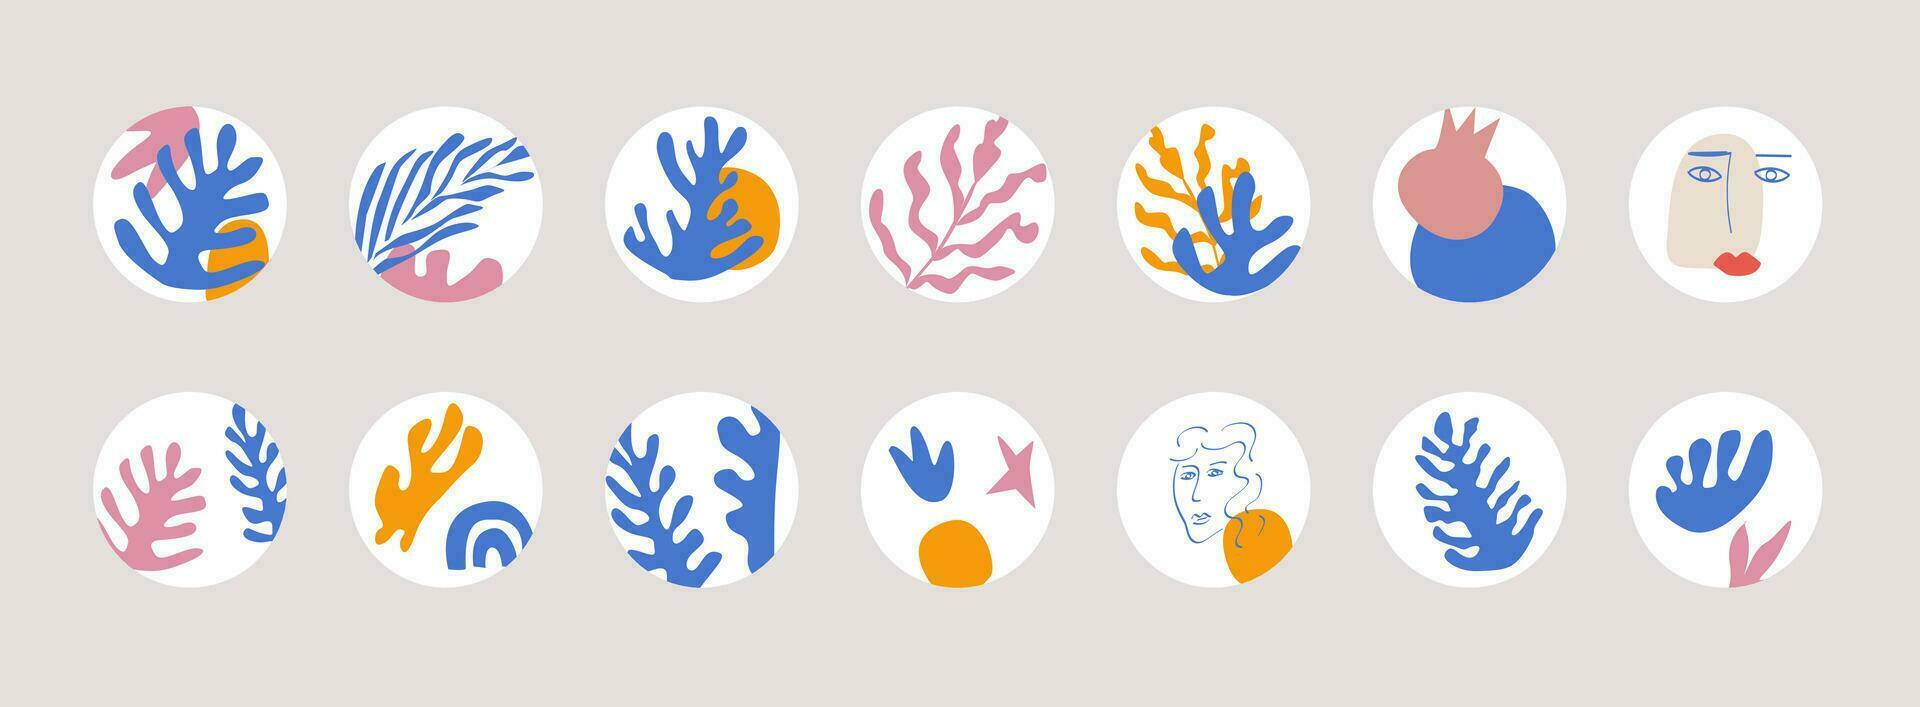 Set of matisse inspired cut out shapes and faces circle icons. Collection for social media story, blog post or highlight covers with abstract portraits. Vector illustration.